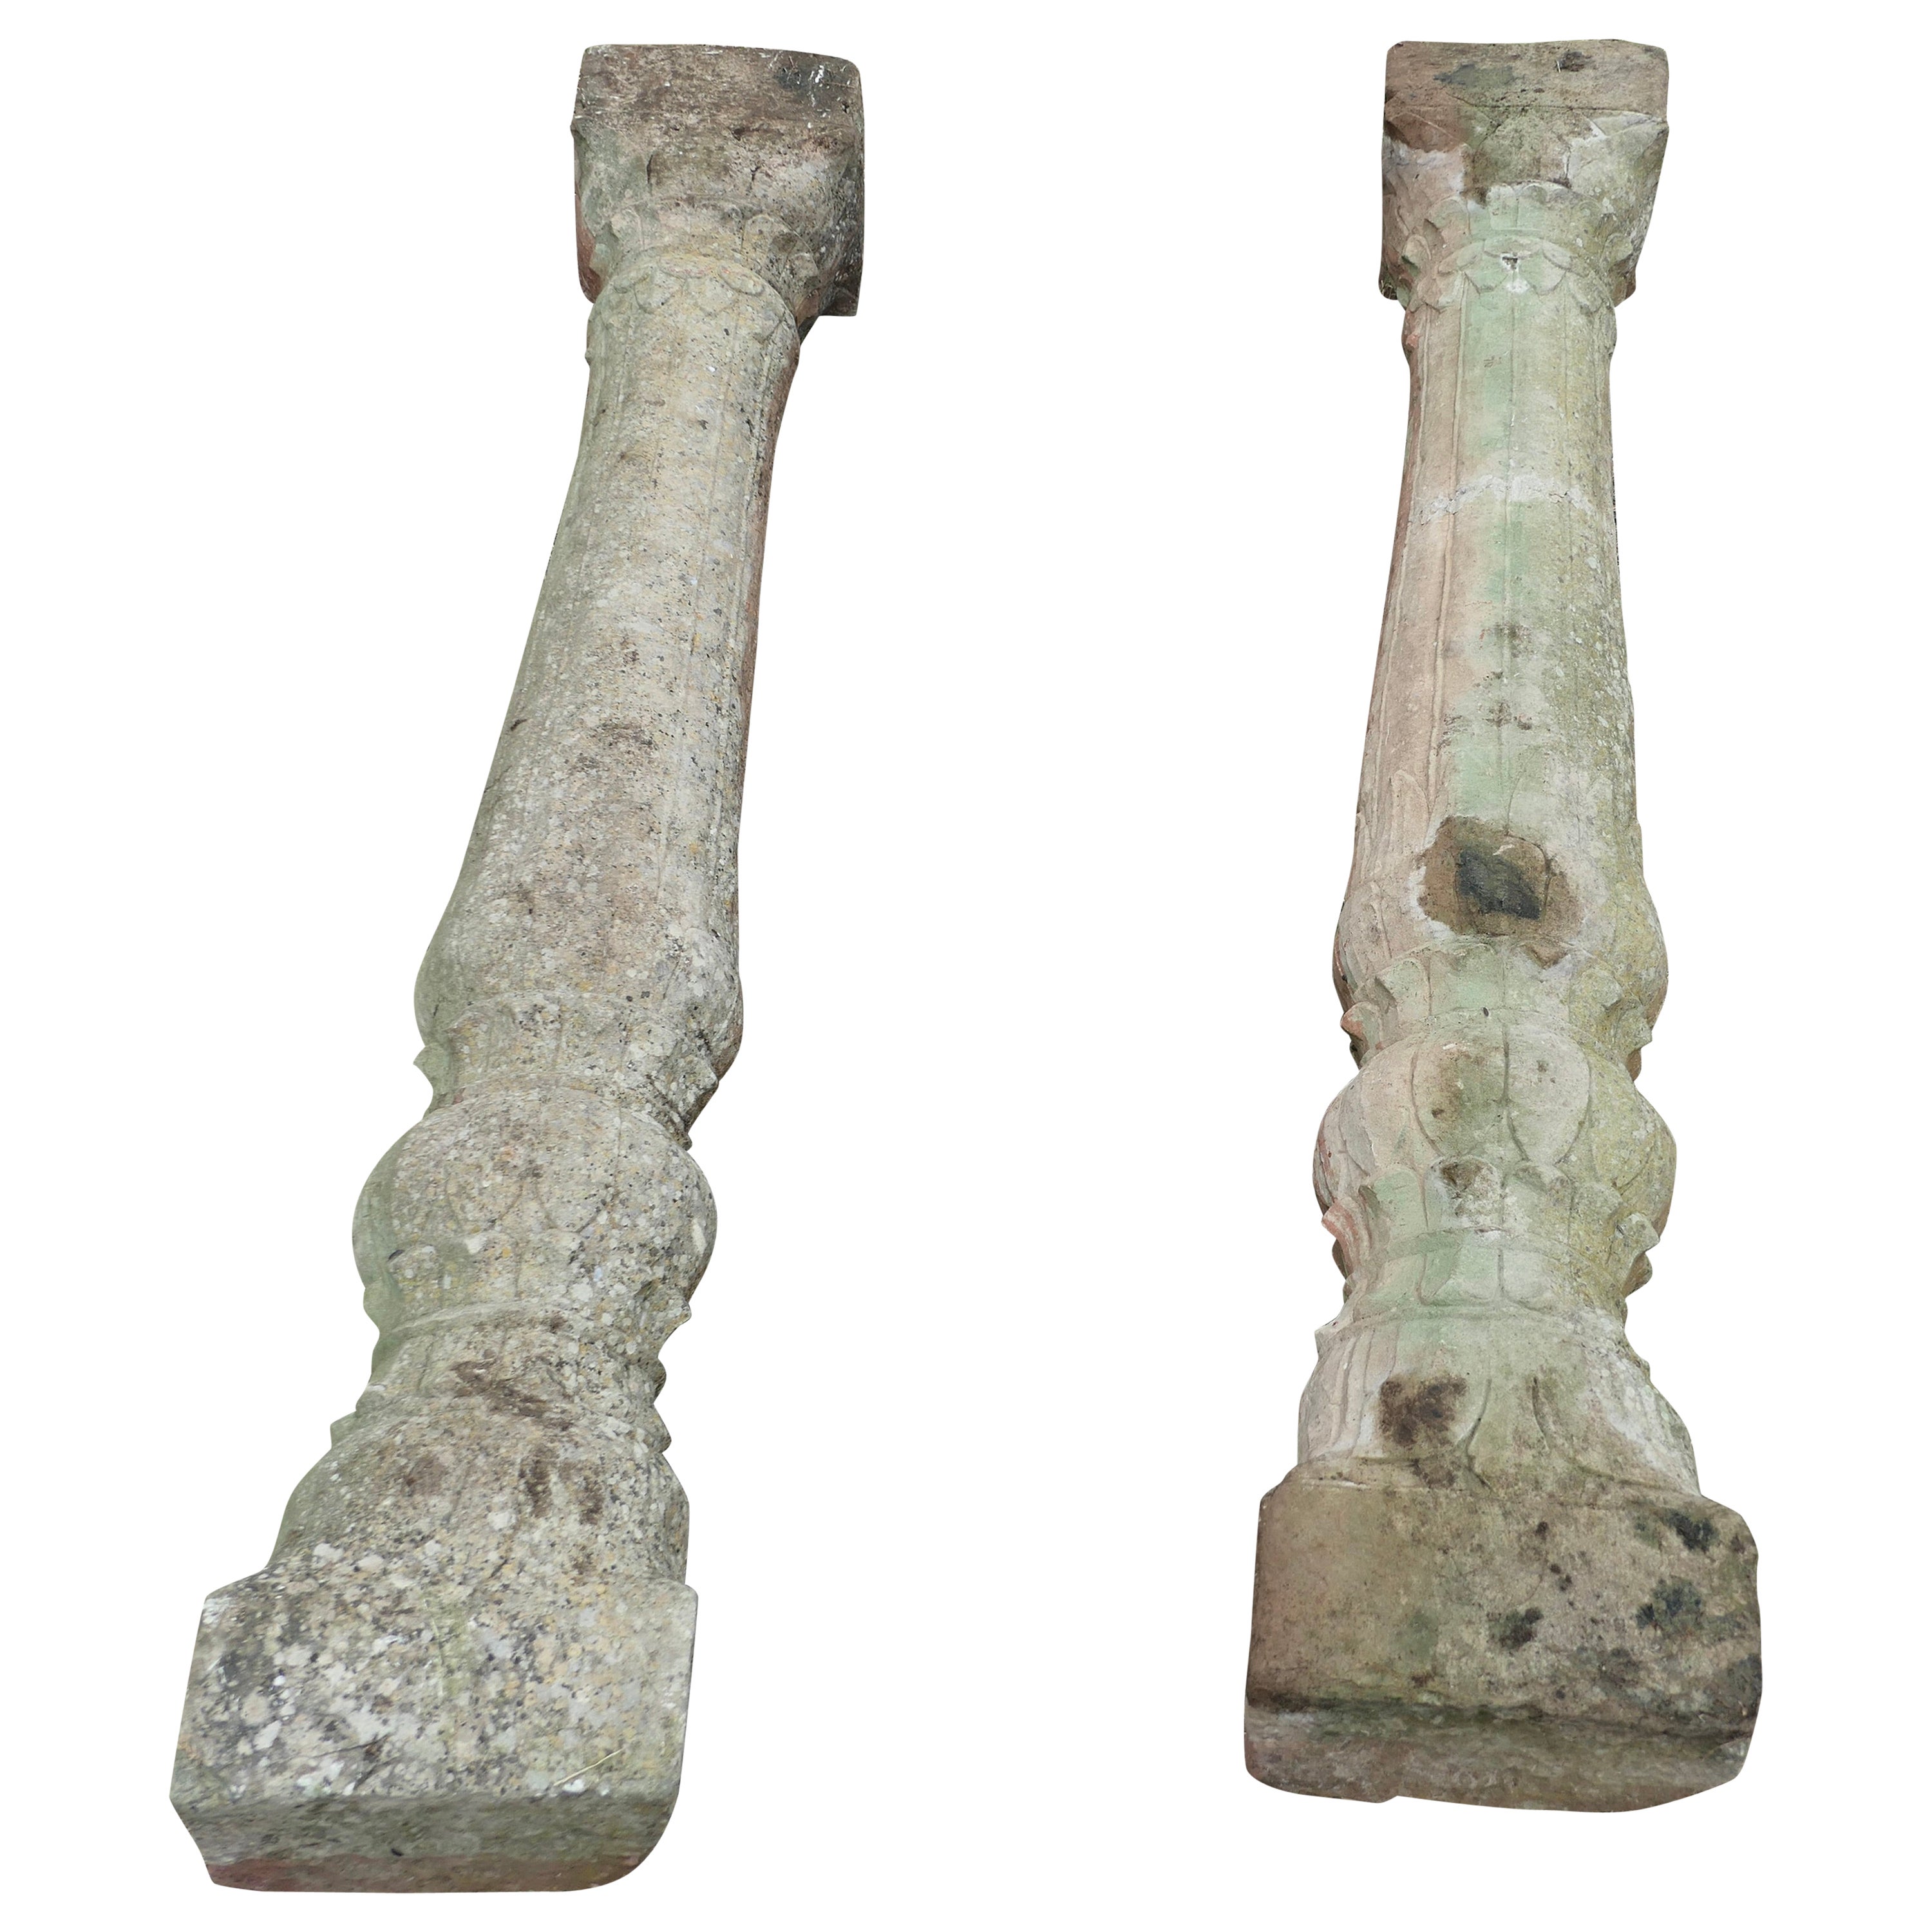 A Pair of Ancient Corinthian Type Stone Columns For Sale